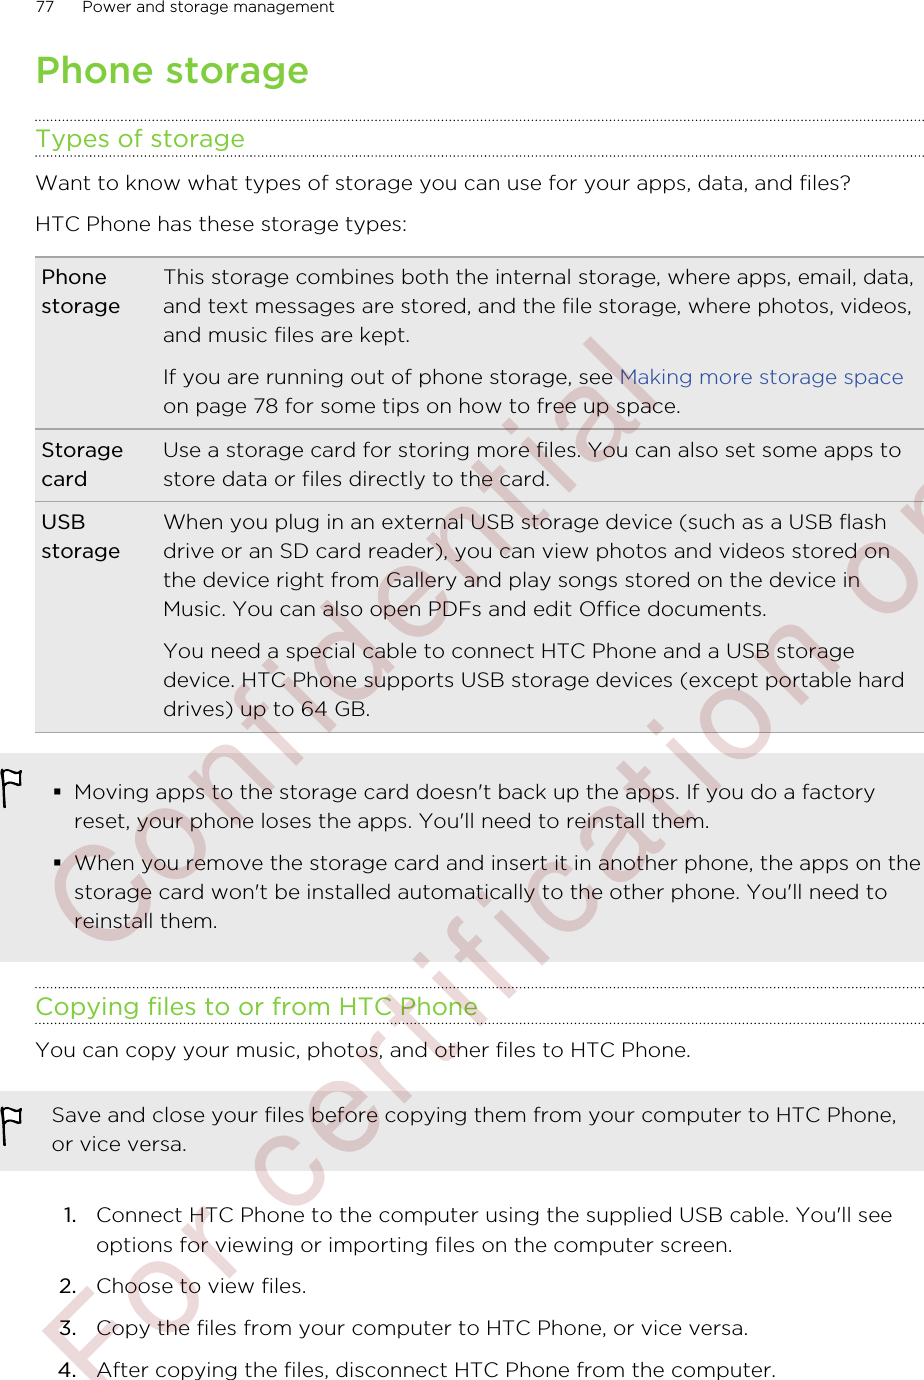 Phone storageTypes of storageWant to know what types of storage you can use for your apps, data, and files?HTC Phone has these storage types:PhonestorageThis storage combines both the internal storage, where apps, email, data,and text messages are stored, and the file storage, where photos, videos,and music files are kept.If you are running out of phone storage, see Making more storage spaceon page 78 for some tips on how to free up space.StoragecardUse a storage card for storing more files. You can also set some apps tostore data or files directly to the card.USBstorageWhen you plug in an external USB storage device (such as a USB flashdrive or an SD card reader), you can view photos and videos stored onthe device right from Gallery and play songs stored on the device inMusic. You can also open PDFs and edit Office documents.You need a special cable to connect HTC Phone and a USB storagedevice. HTC Phone supports USB storage devices (except portable harddrives) up to 64 GB.§Moving apps to the storage card doesn&apos;t back up the apps. If you do a factoryreset, your phone loses the apps. You&apos;ll need to reinstall them.§When you remove the storage card and insert it in another phone, the apps on thestorage card won&apos;t be installed automatically to the other phone. You&apos;ll need toreinstall them.Copying files to or from HTC PhoneYou can copy your music, photos, and other files to HTC Phone.Save and close your files before copying them from your computer to HTC Phone,or vice versa.1. Connect HTC Phone to the computer using the supplied USB cable. You&apos;ll seeoptions for viewing or importing files on the computer screen.2. Choose to view files.3. Copy the files from your computer to HTC Phone, or vice versa.4. After copying the files, disconnect HTC Phone from the computer.77 Power and storage management        Confidential  For certification only